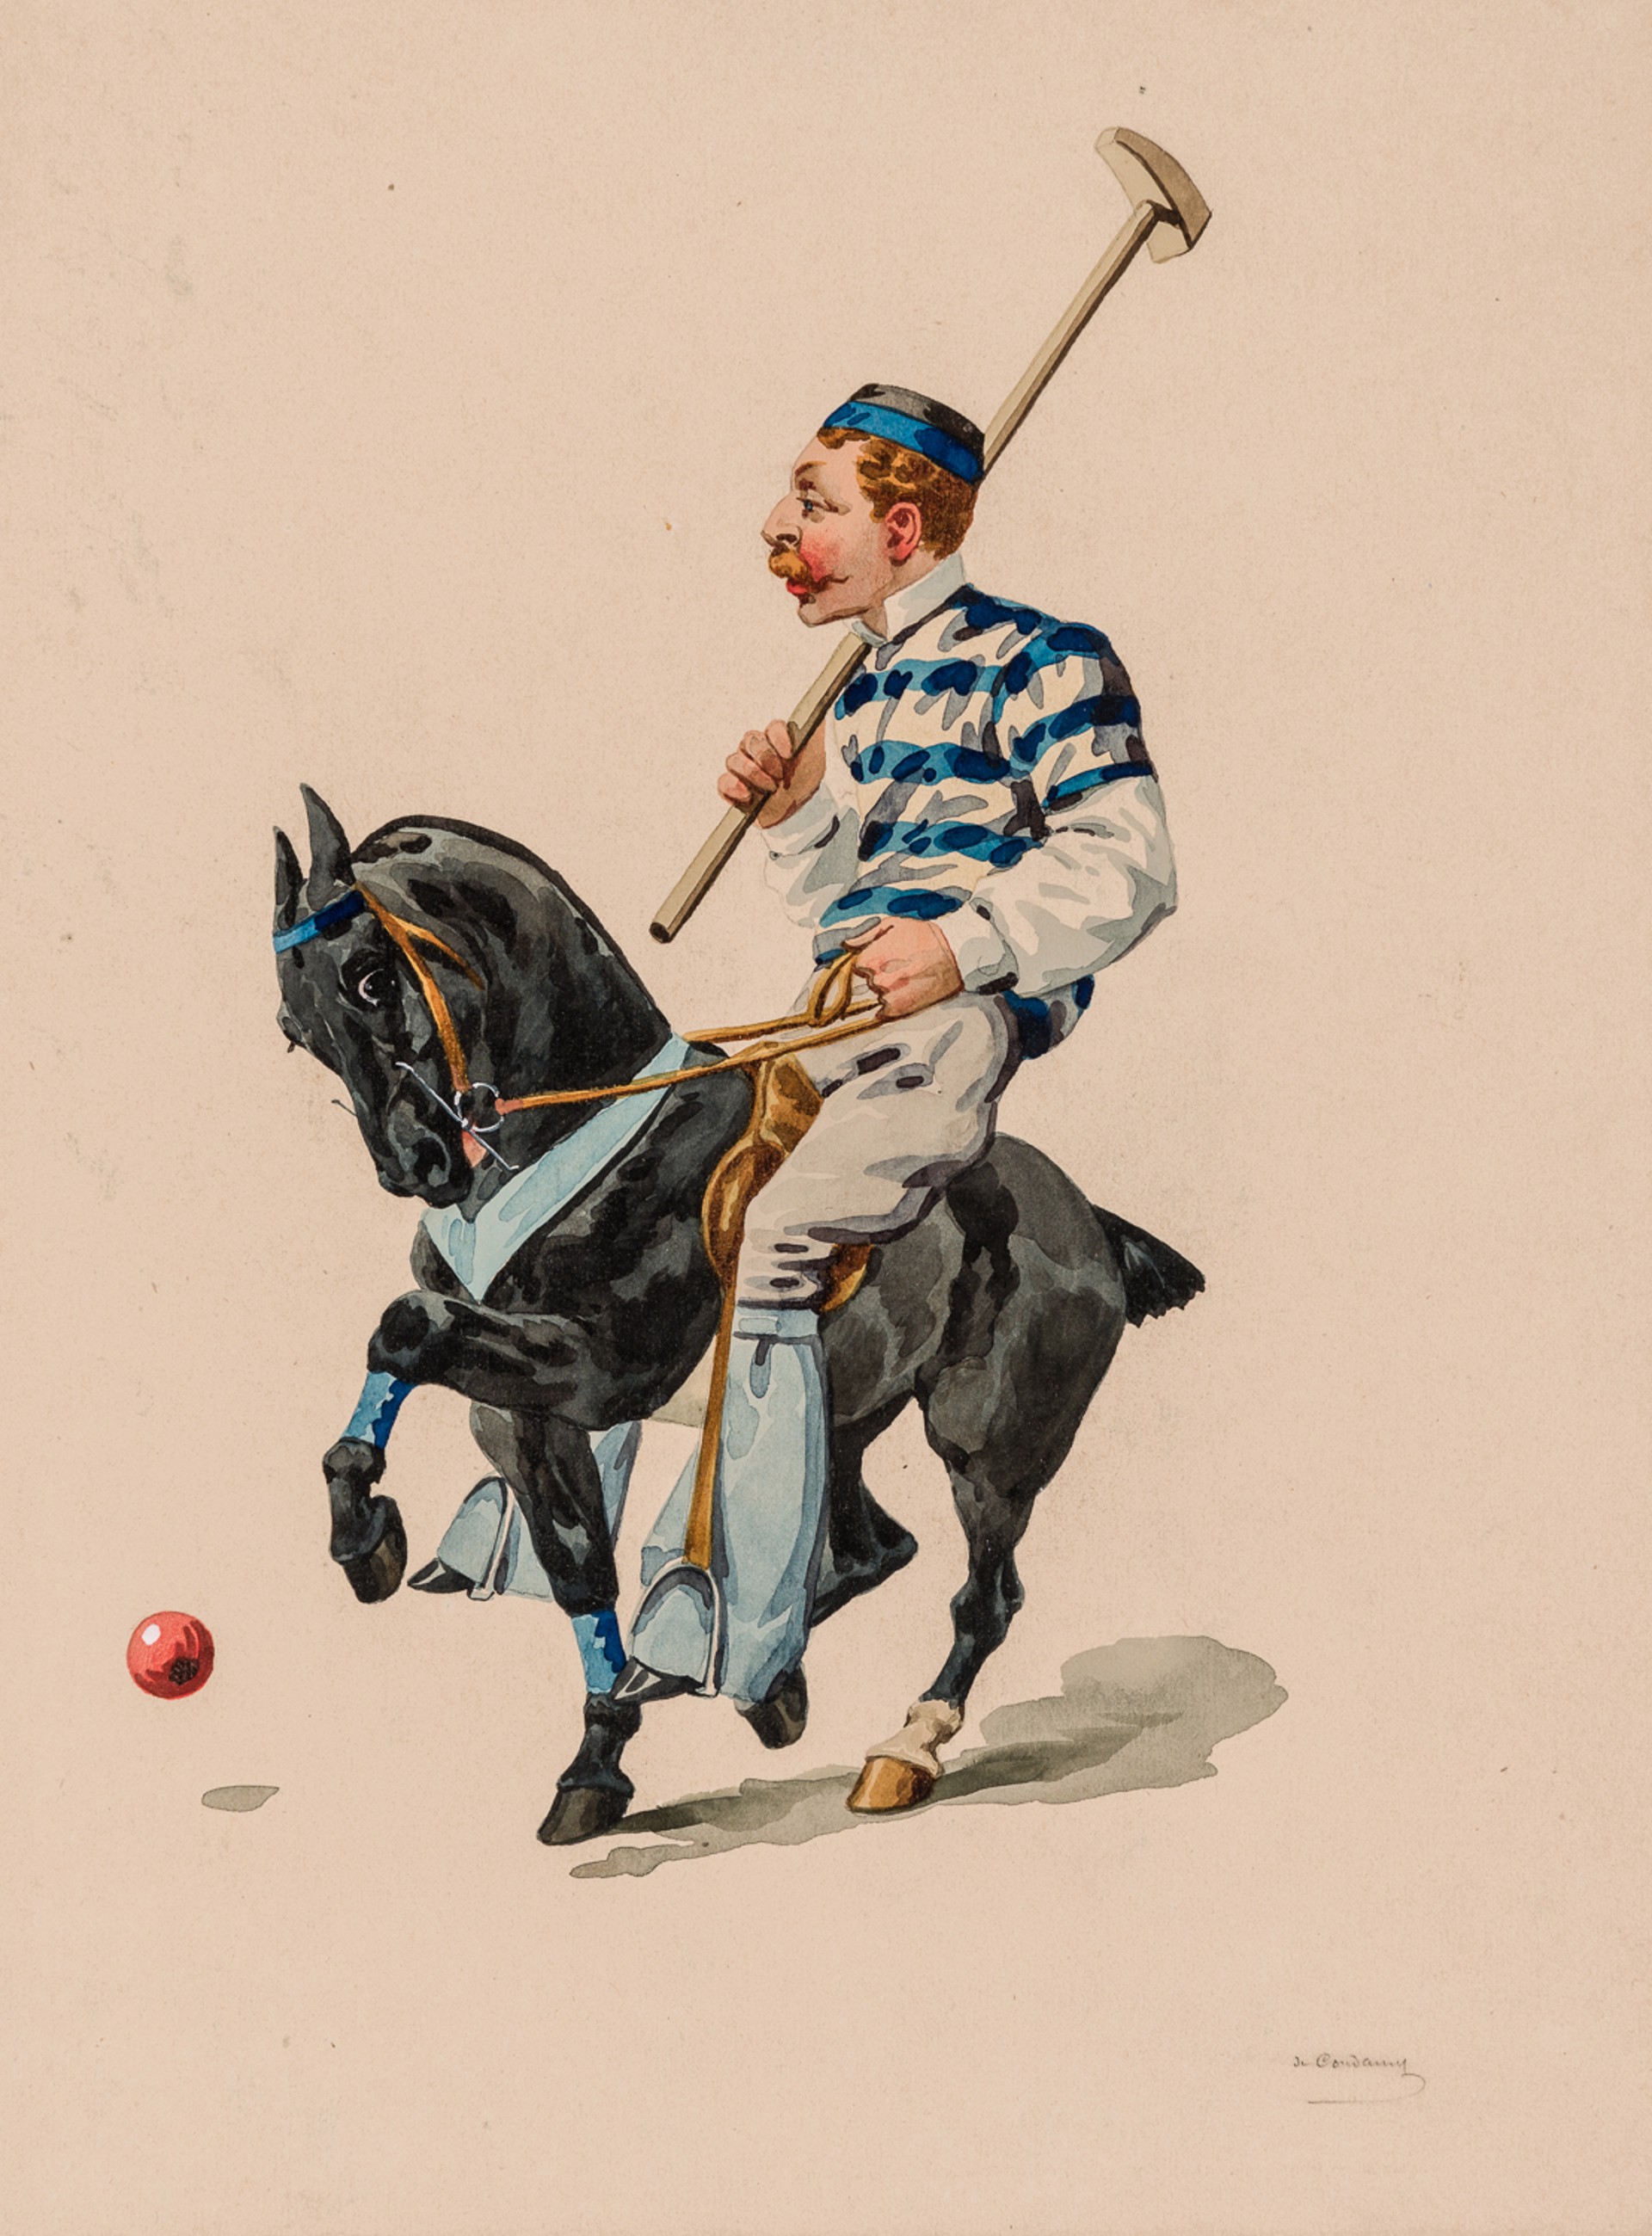 POLO INCIDENTS (set of 4) by Charles-Fernand de Condamy